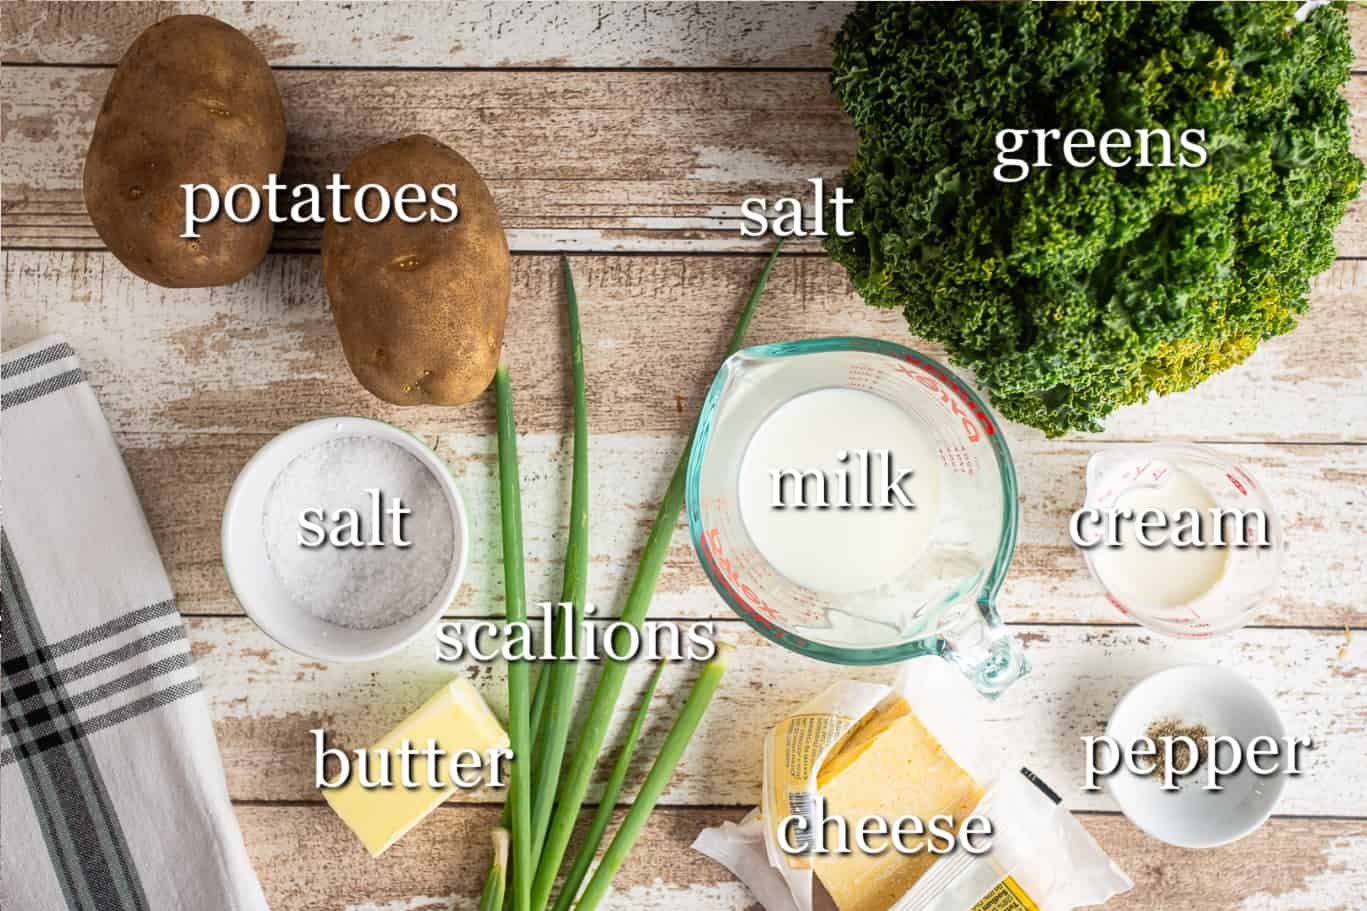 Ingredients for making colcannon, with text labels.